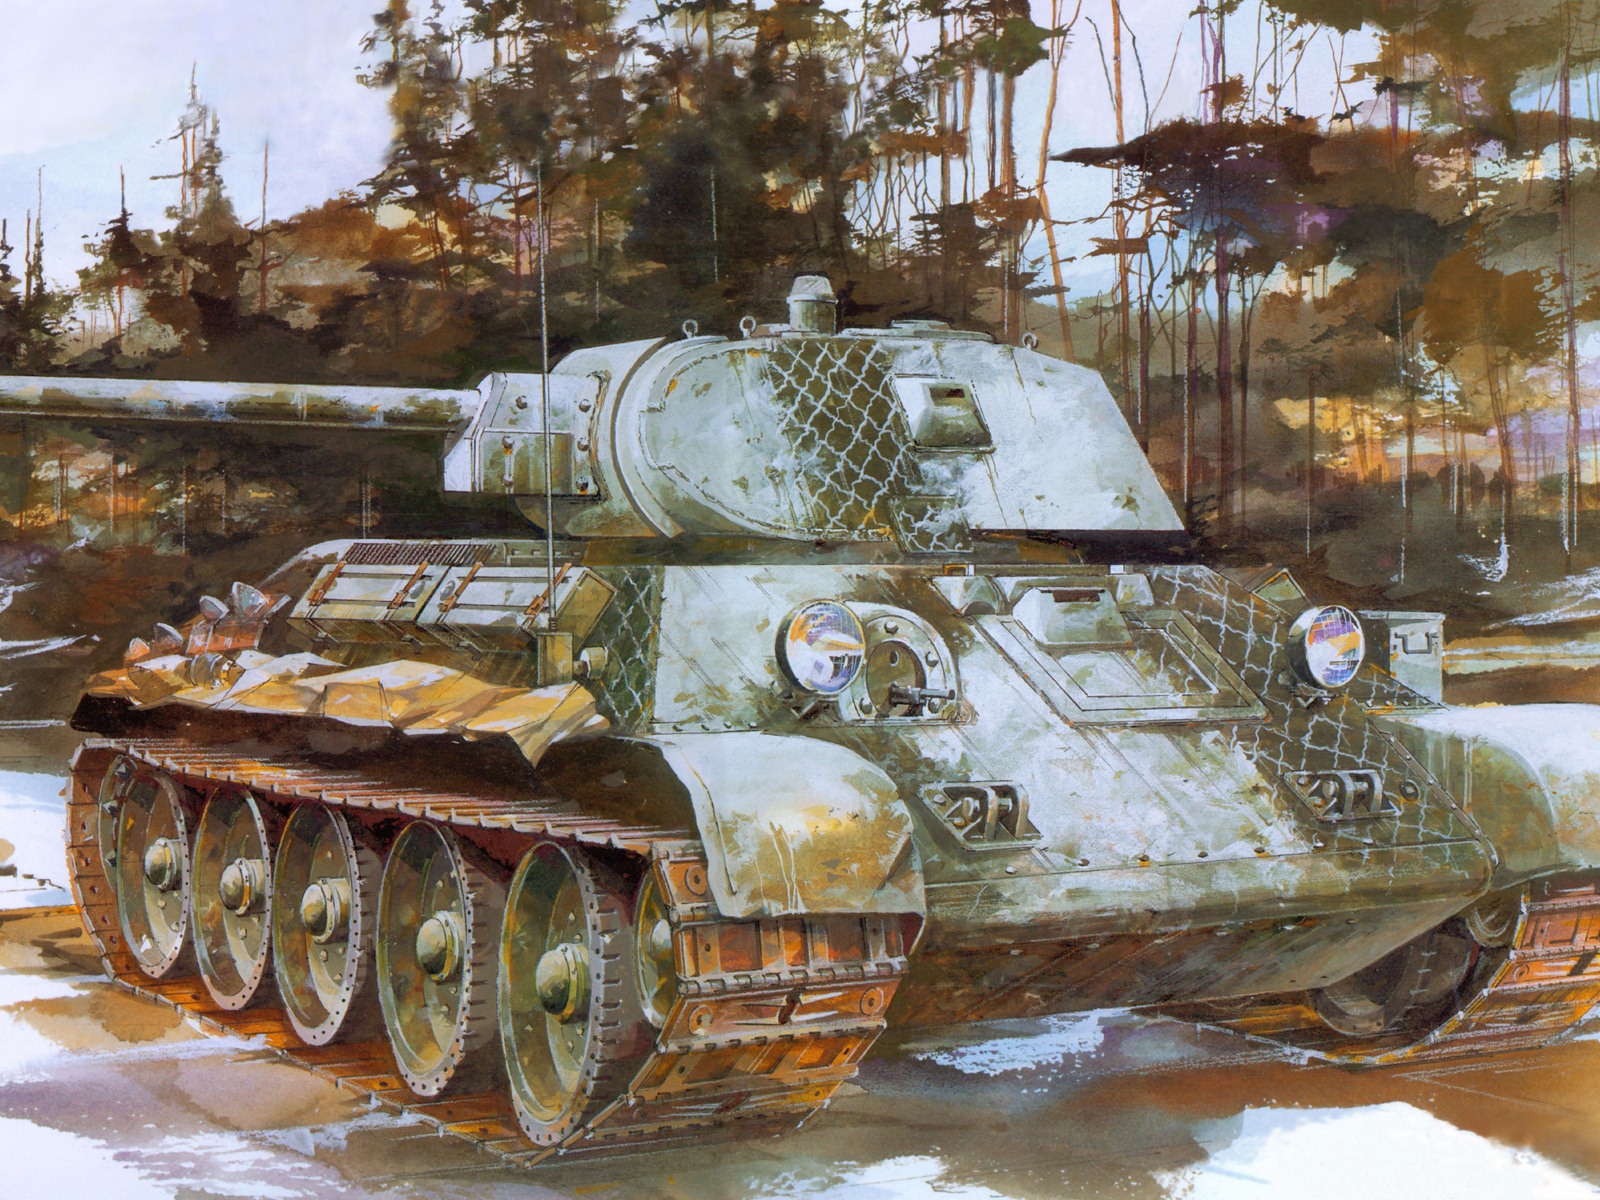 Military tanks, armored HD painting wallpapers #8 - 1600x1200